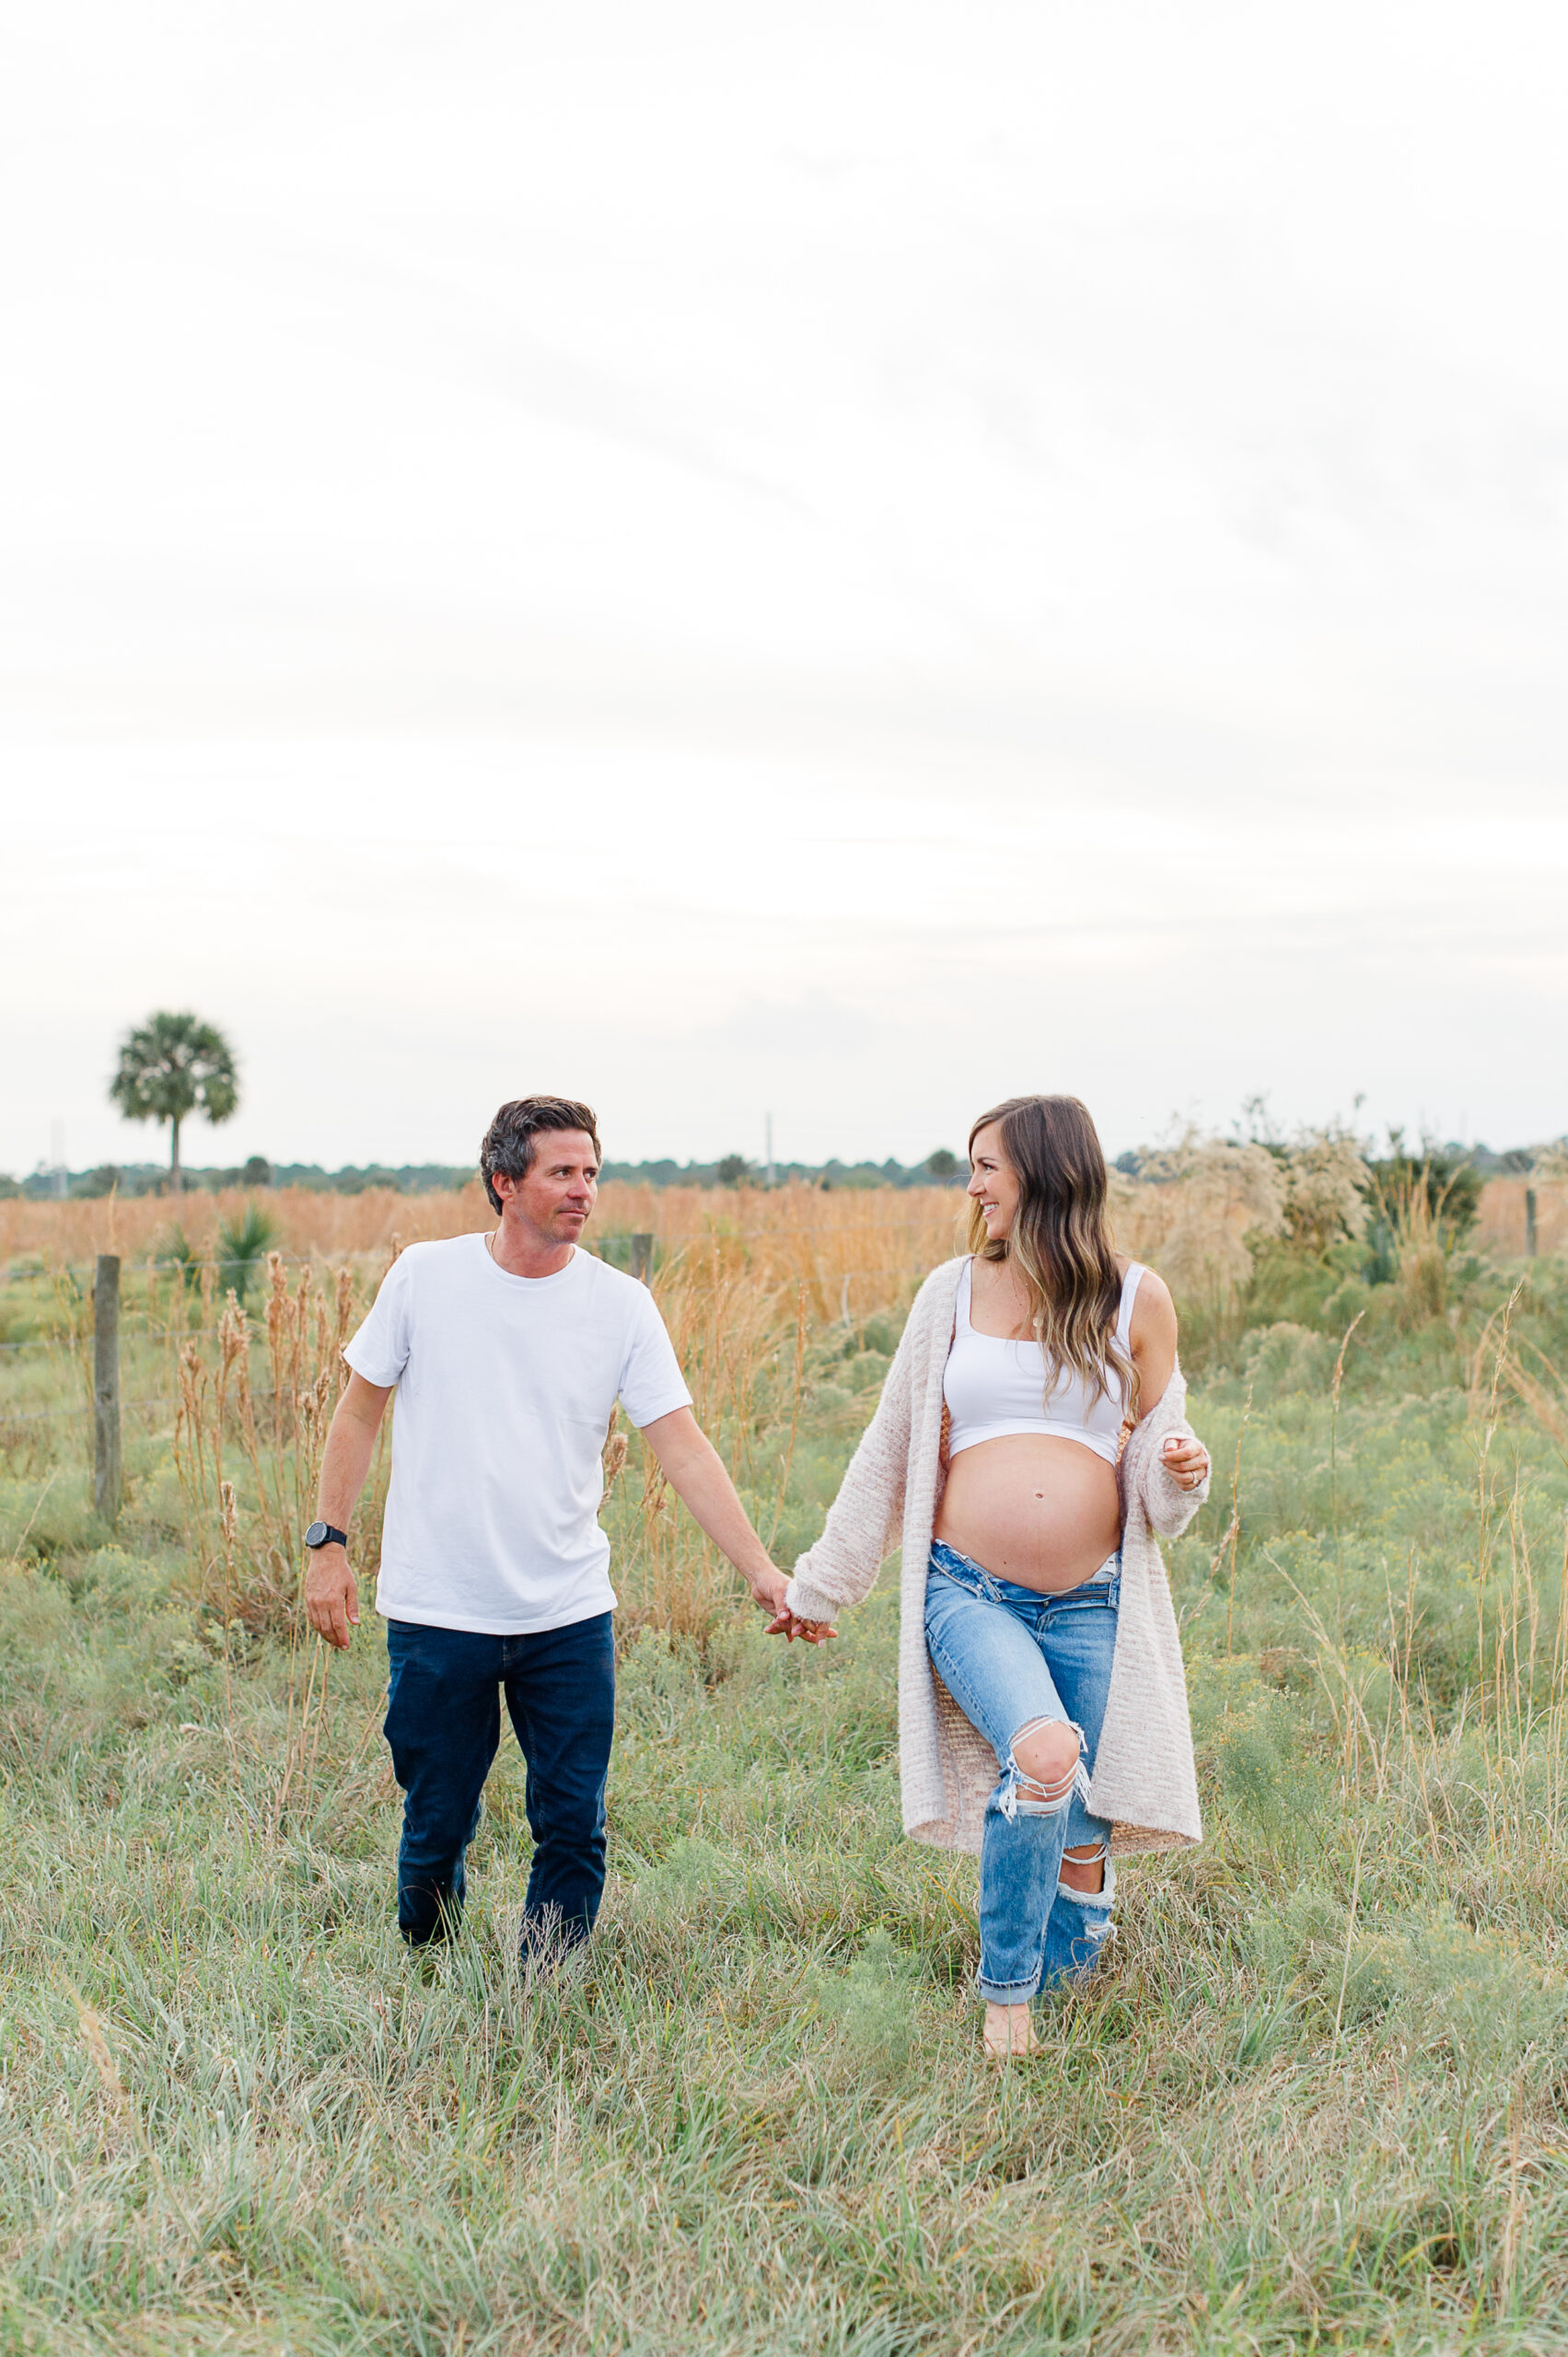 The cutest soon to be new parents to a sweet babygirl, walking through a field of tall grass at sunset